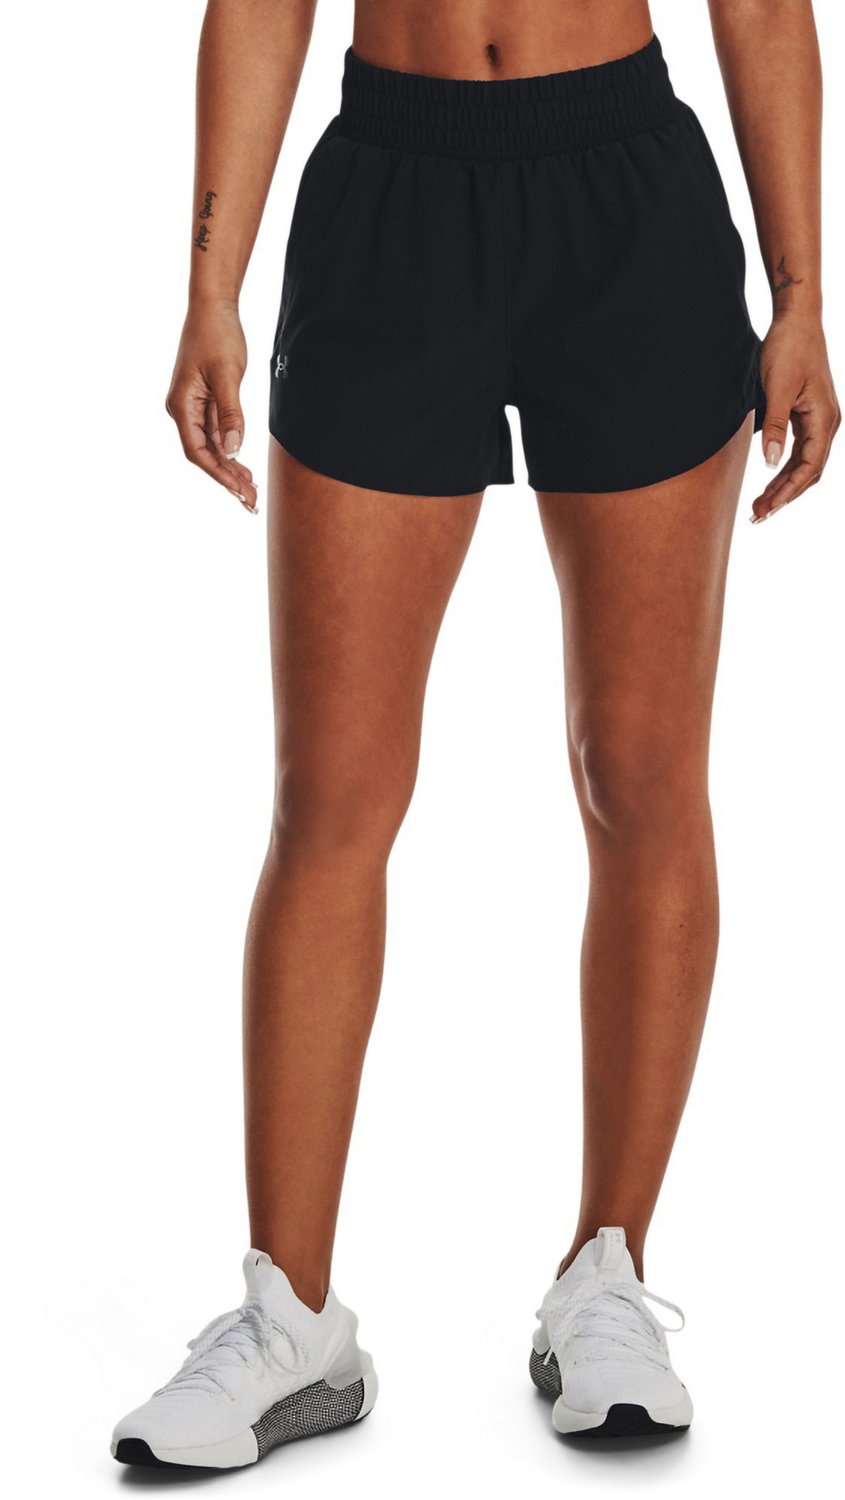 Under Armour Womens Flex Woven Shorts 3in